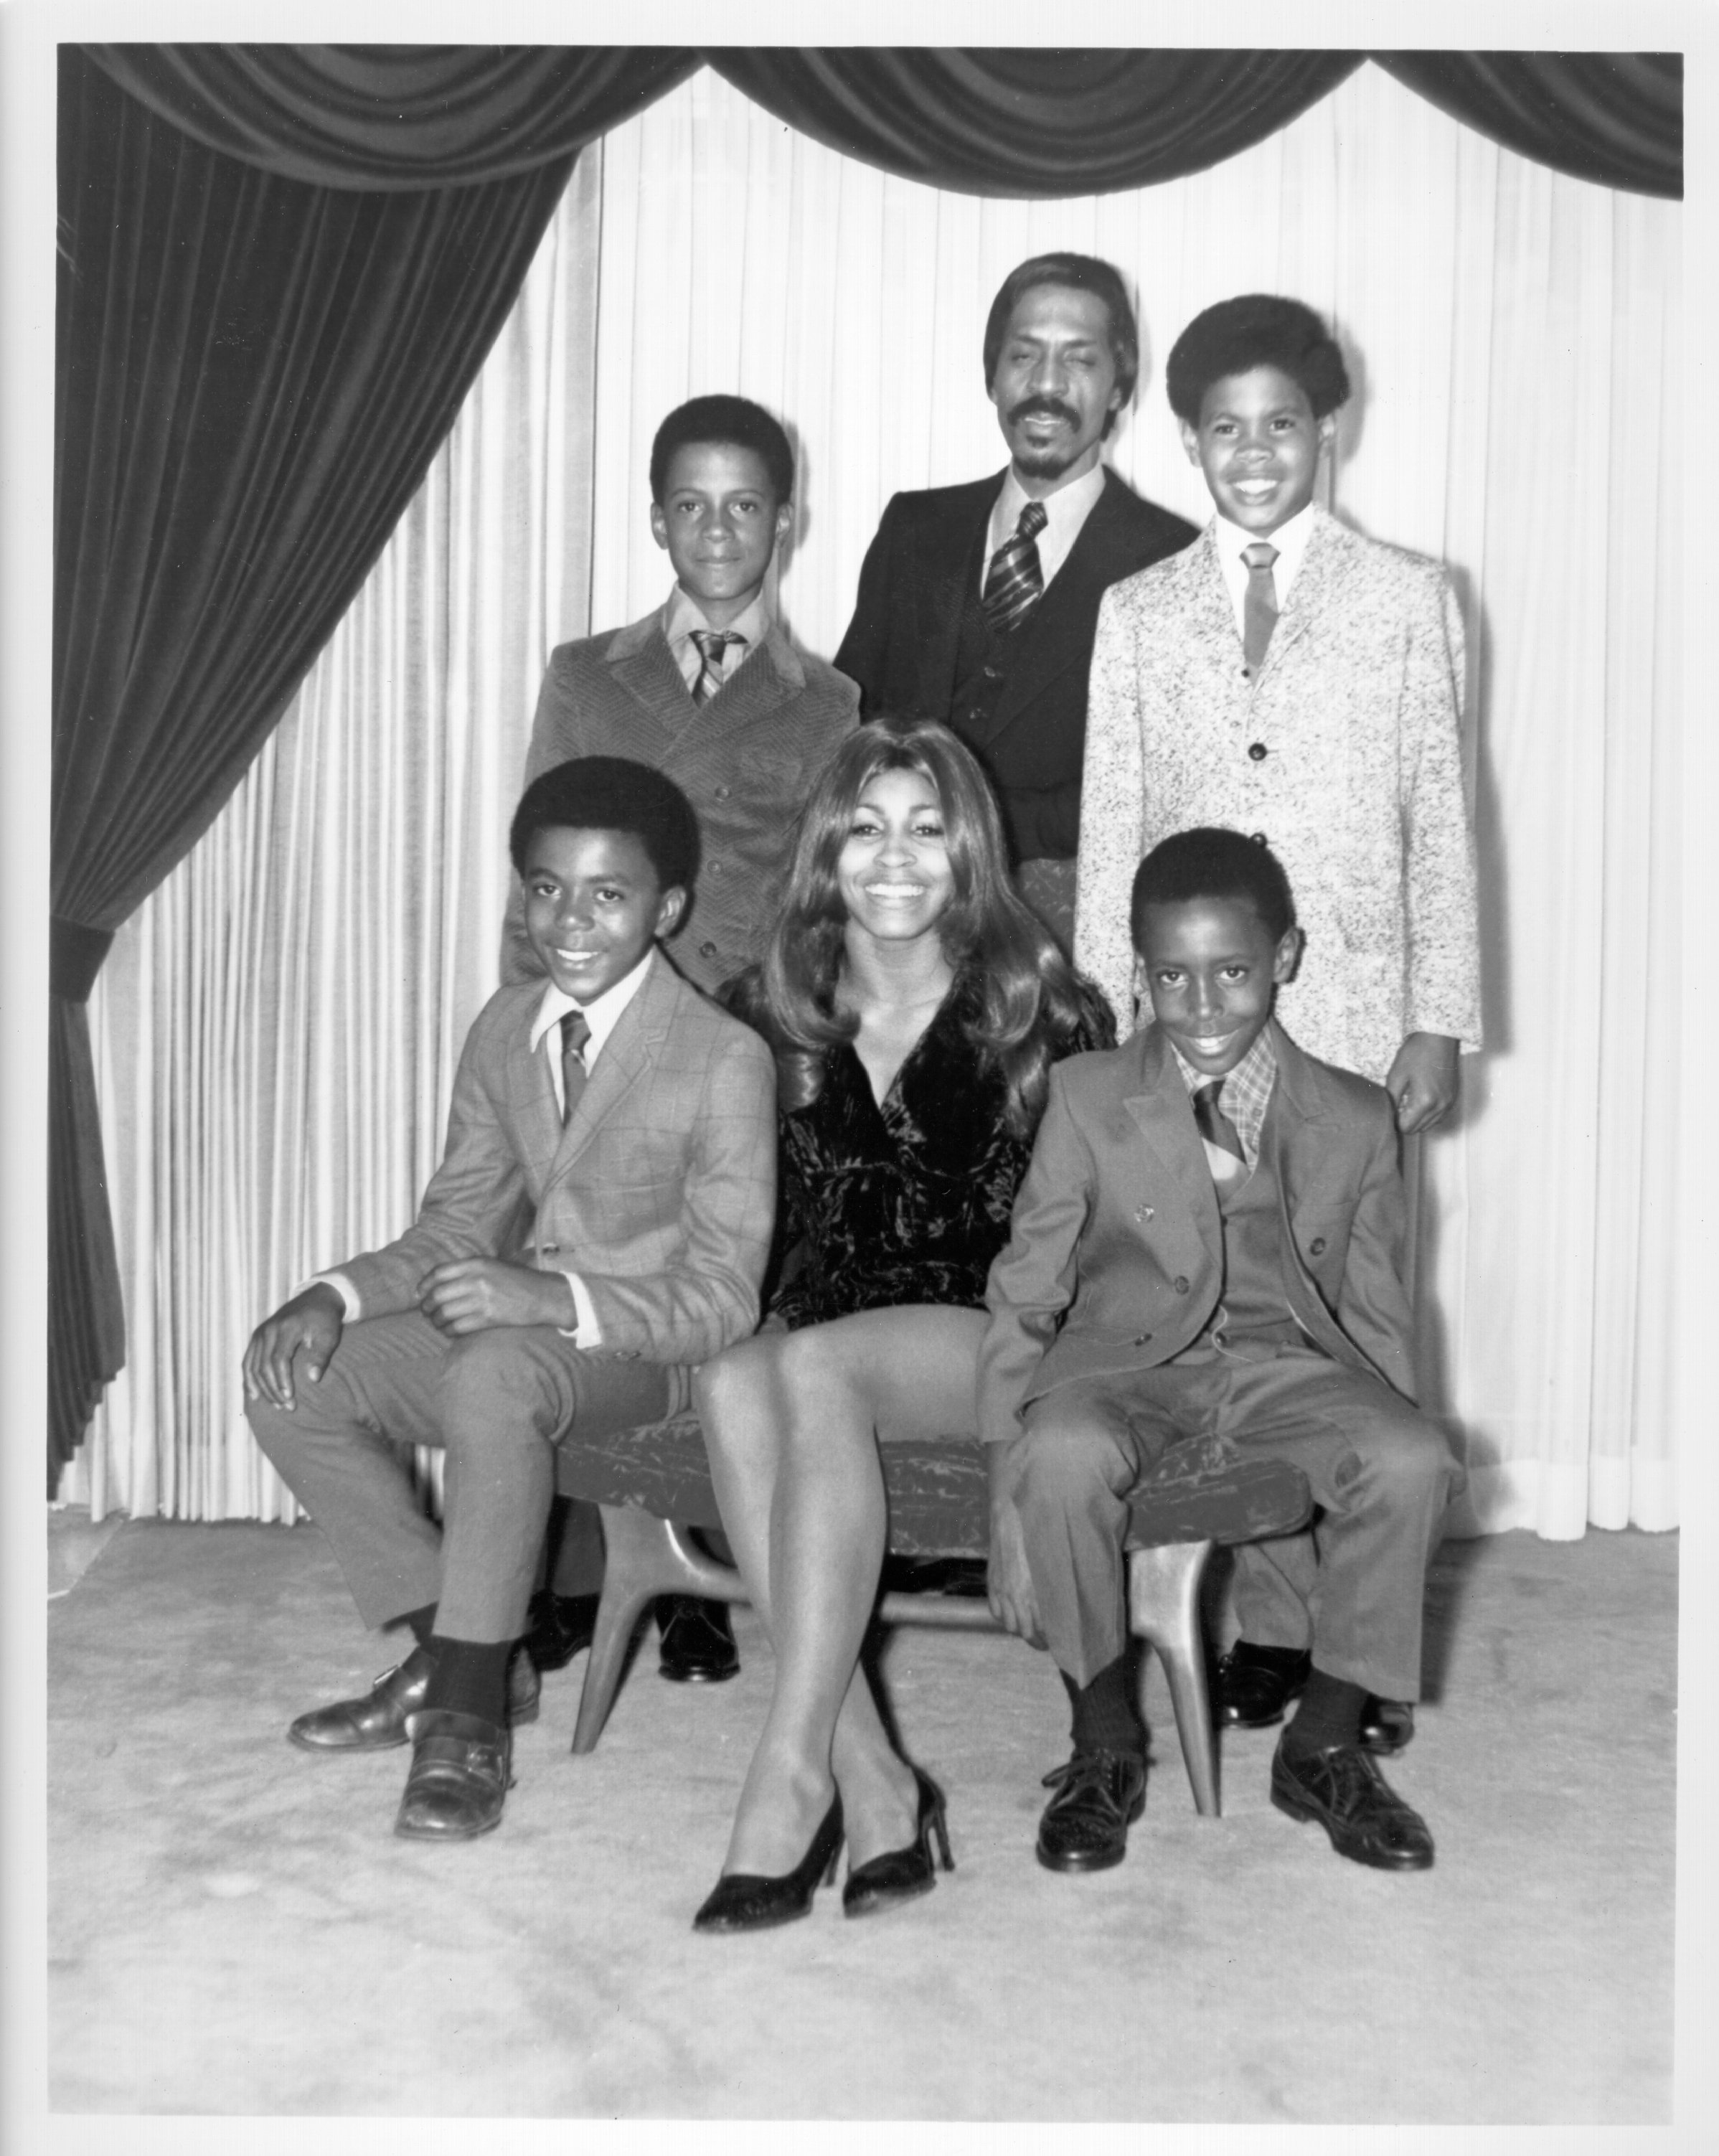 Musicians Ike and Tina Turner pose for a portrait with their son and step-sons. From Bottom Left: Michael Turner, Ike Turner, Jr., Ike Turner, Craig Hill, Ronnie Turner in 1972 ┃Source: Getty Images